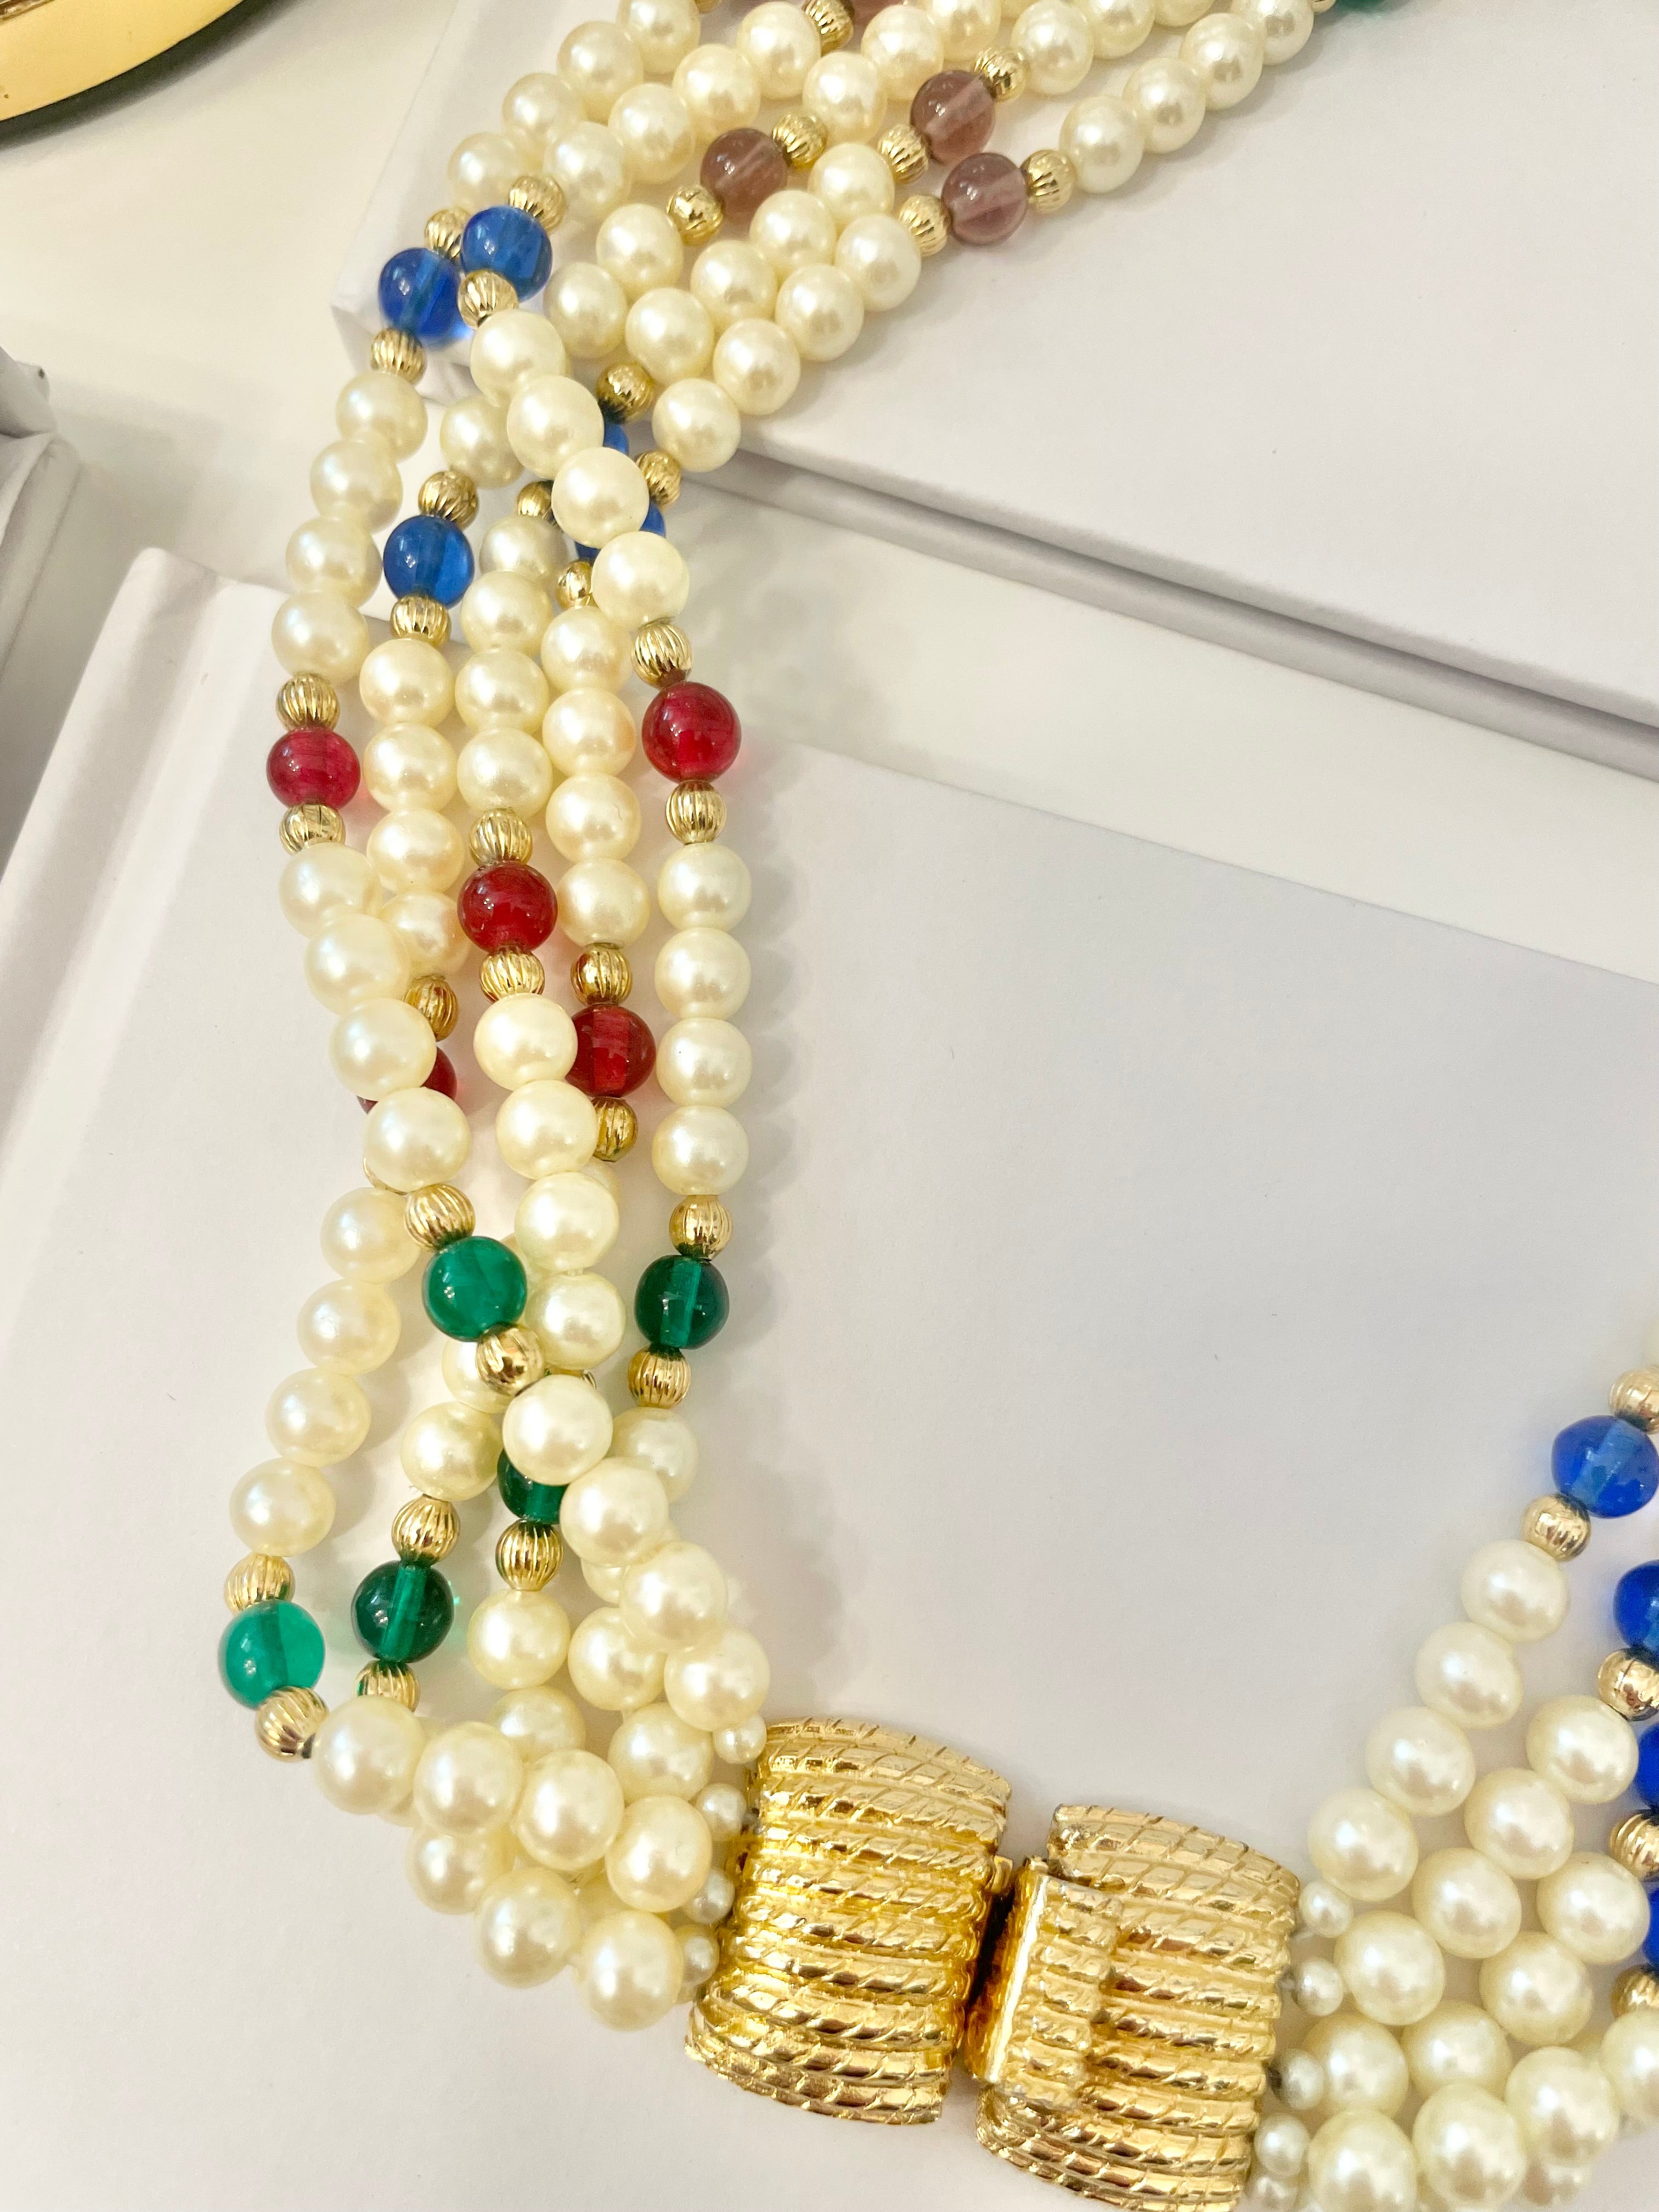 Isn't she charming... she adores anything with pearls..this 1980's super chic multi strand beaded necklace is divine!